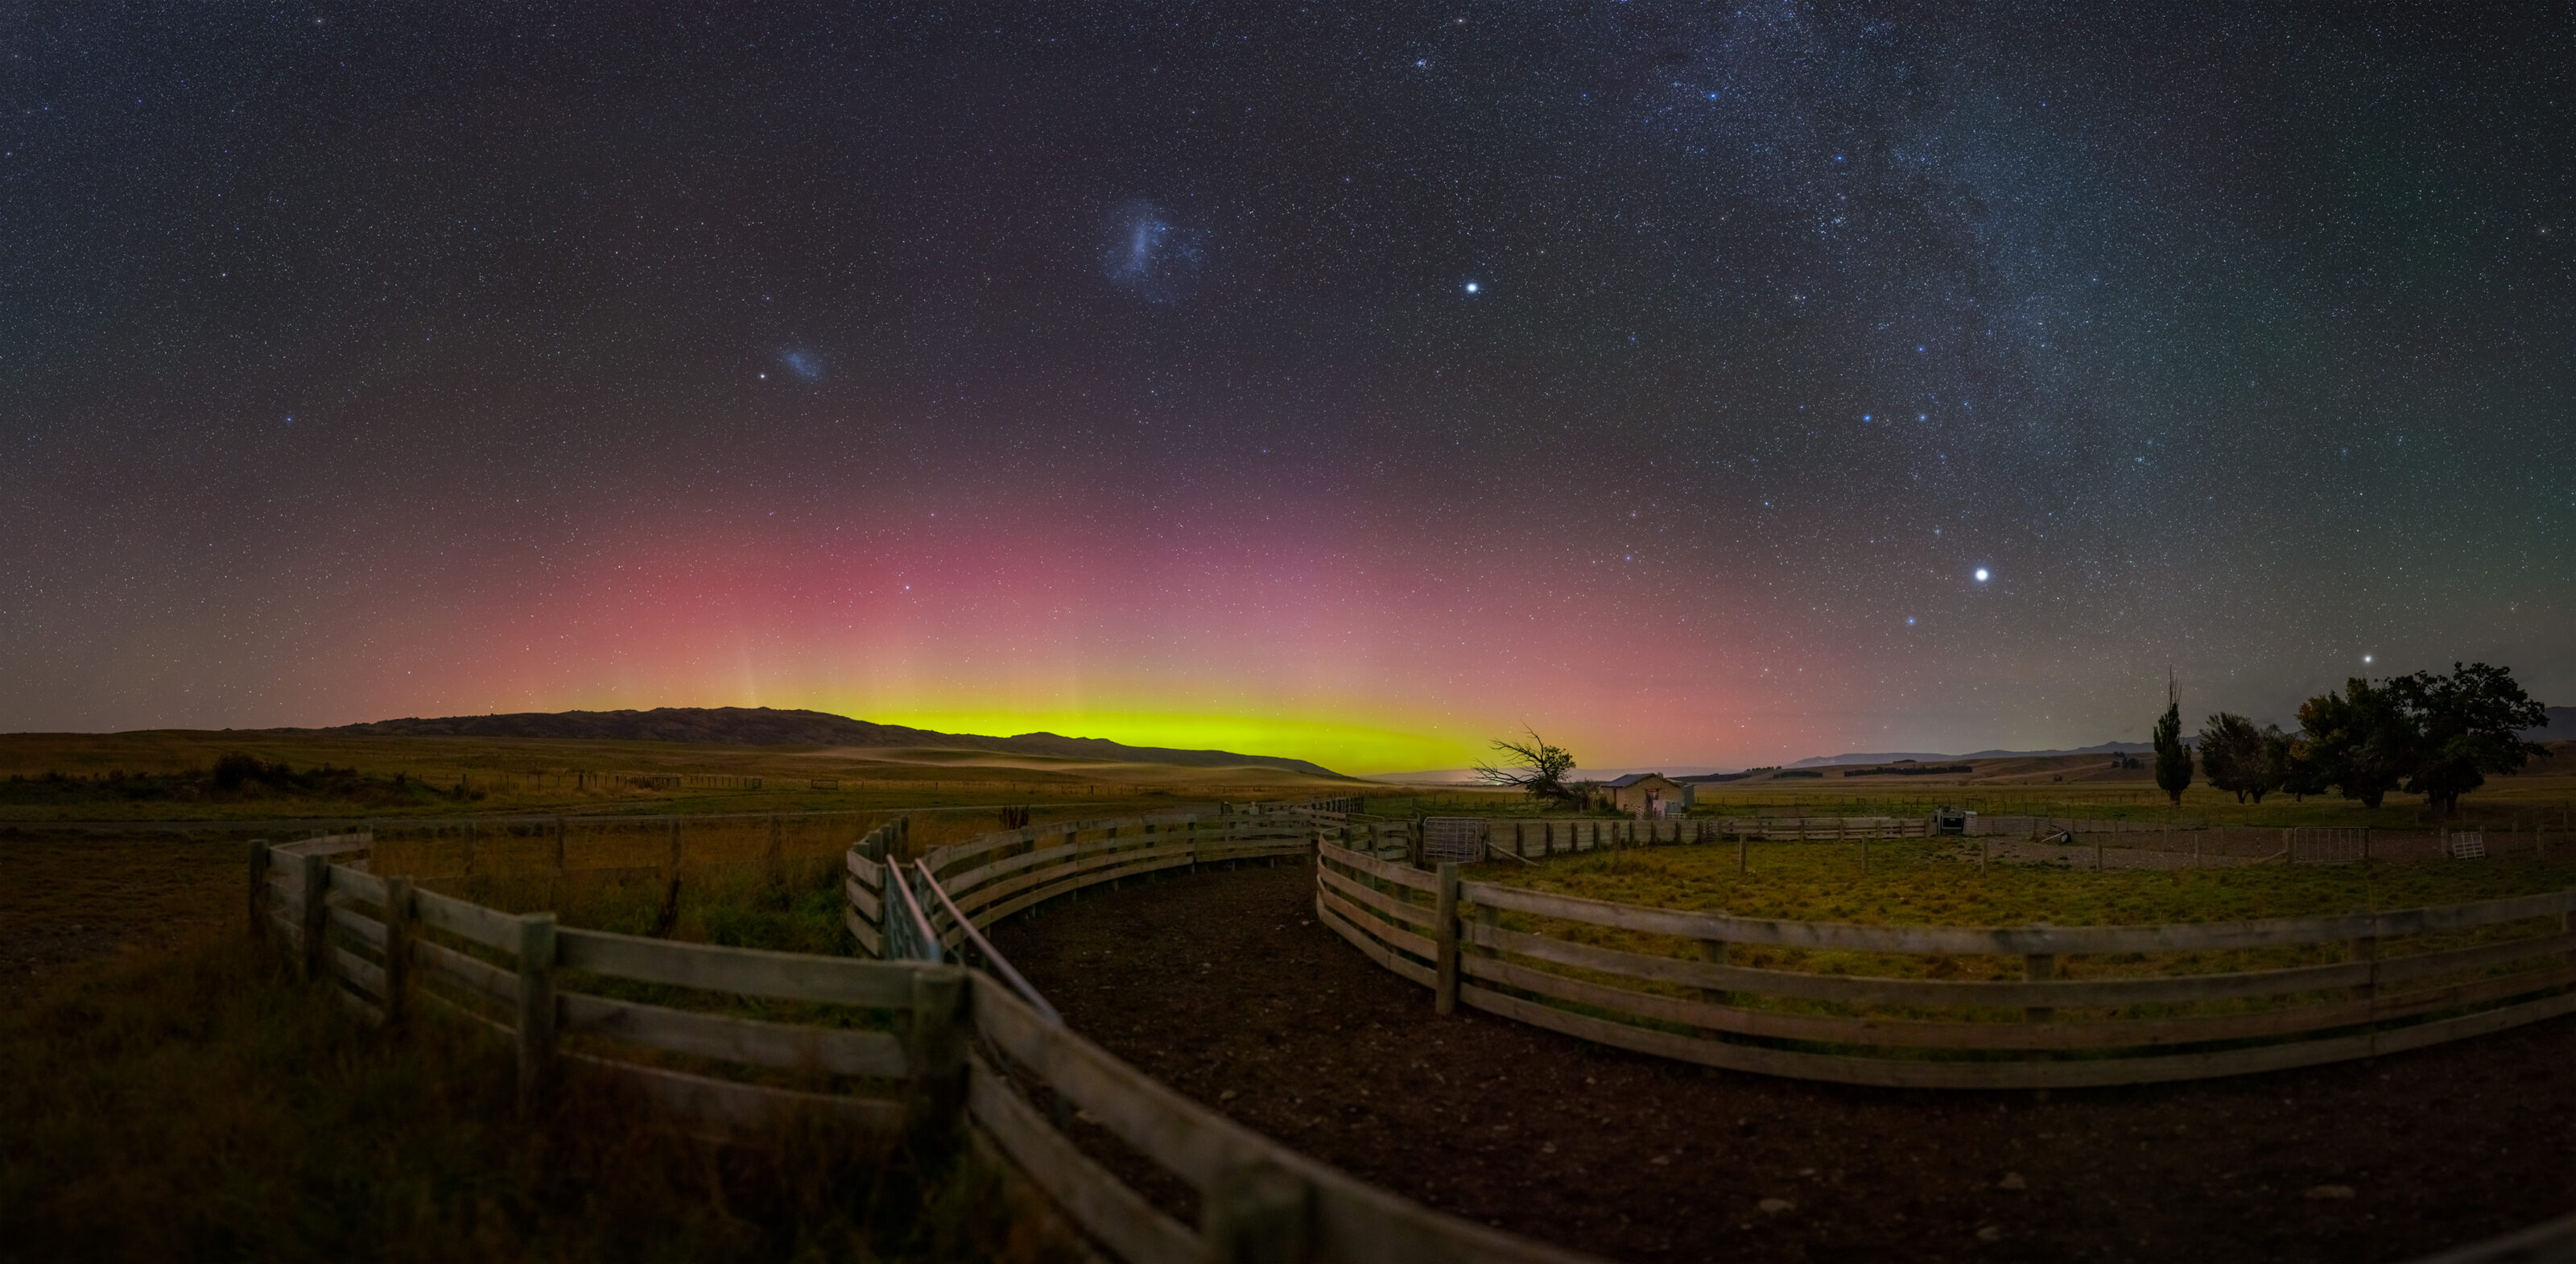 bright gree and pink Aurora Australis display below the starry sky with Large Megallanic Cloud, and above the foreground of Central Otago farm stockyards.